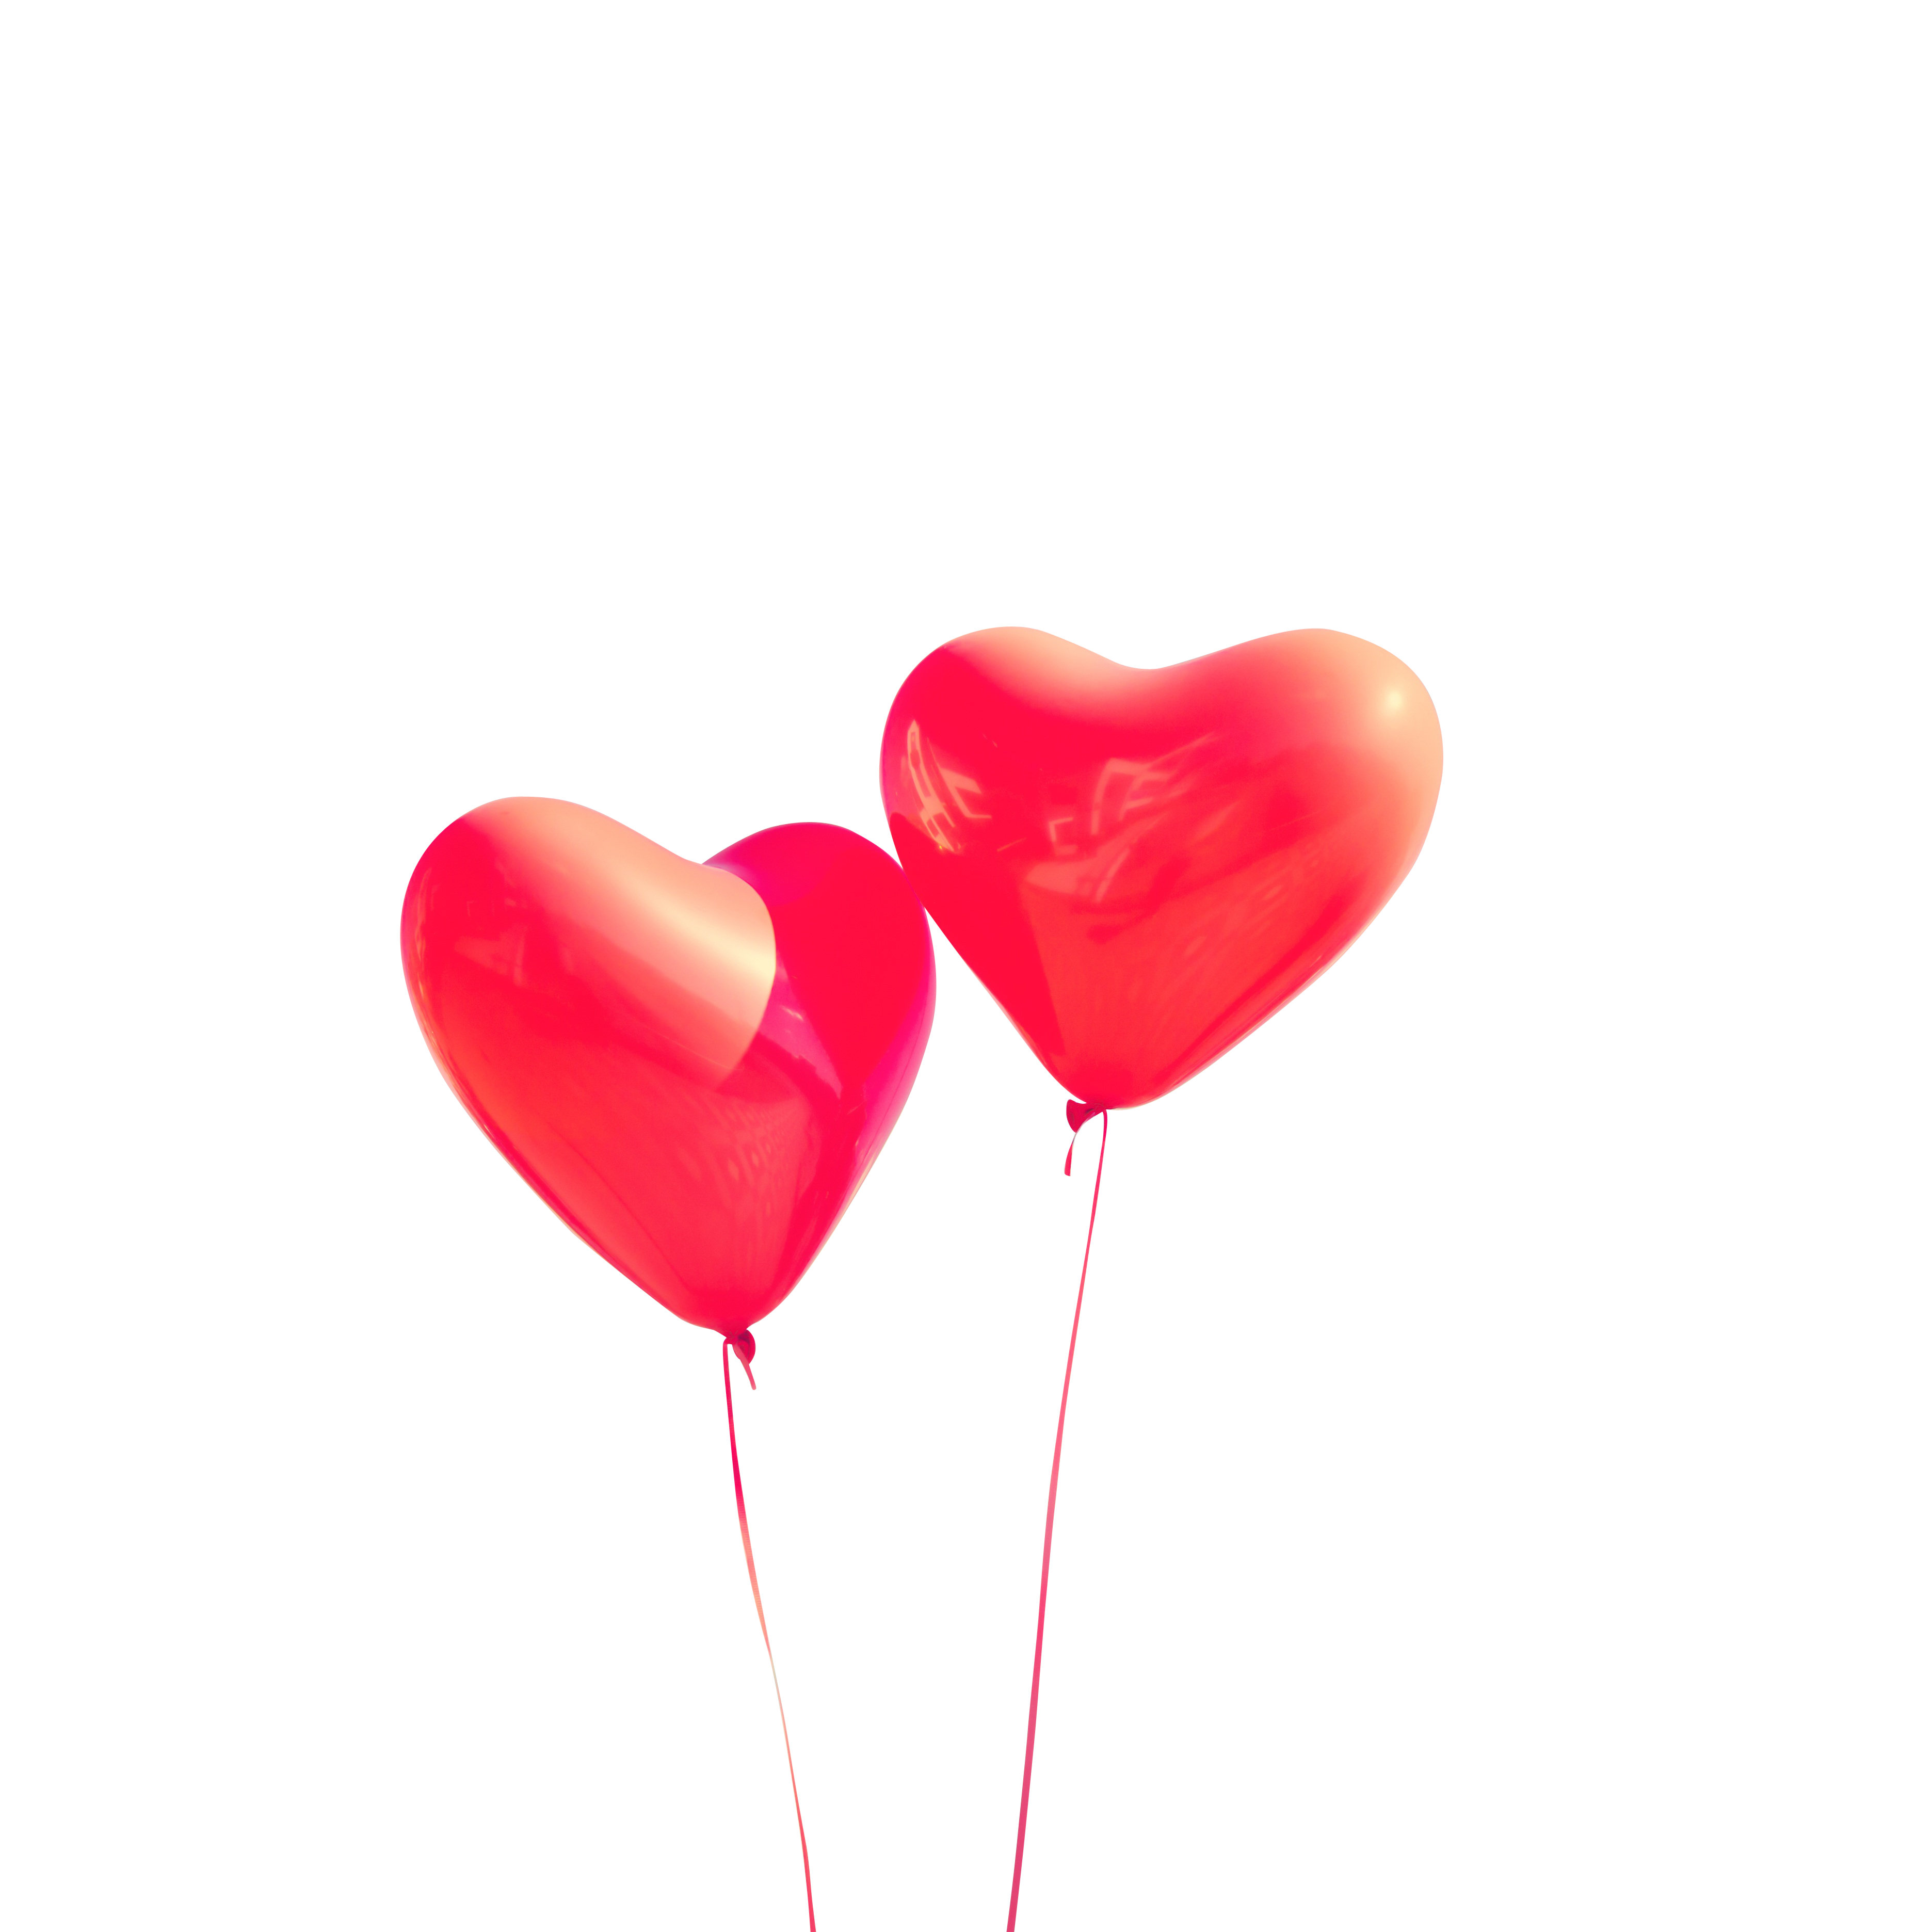 Two Red Balloons In The Shape Of A Heart